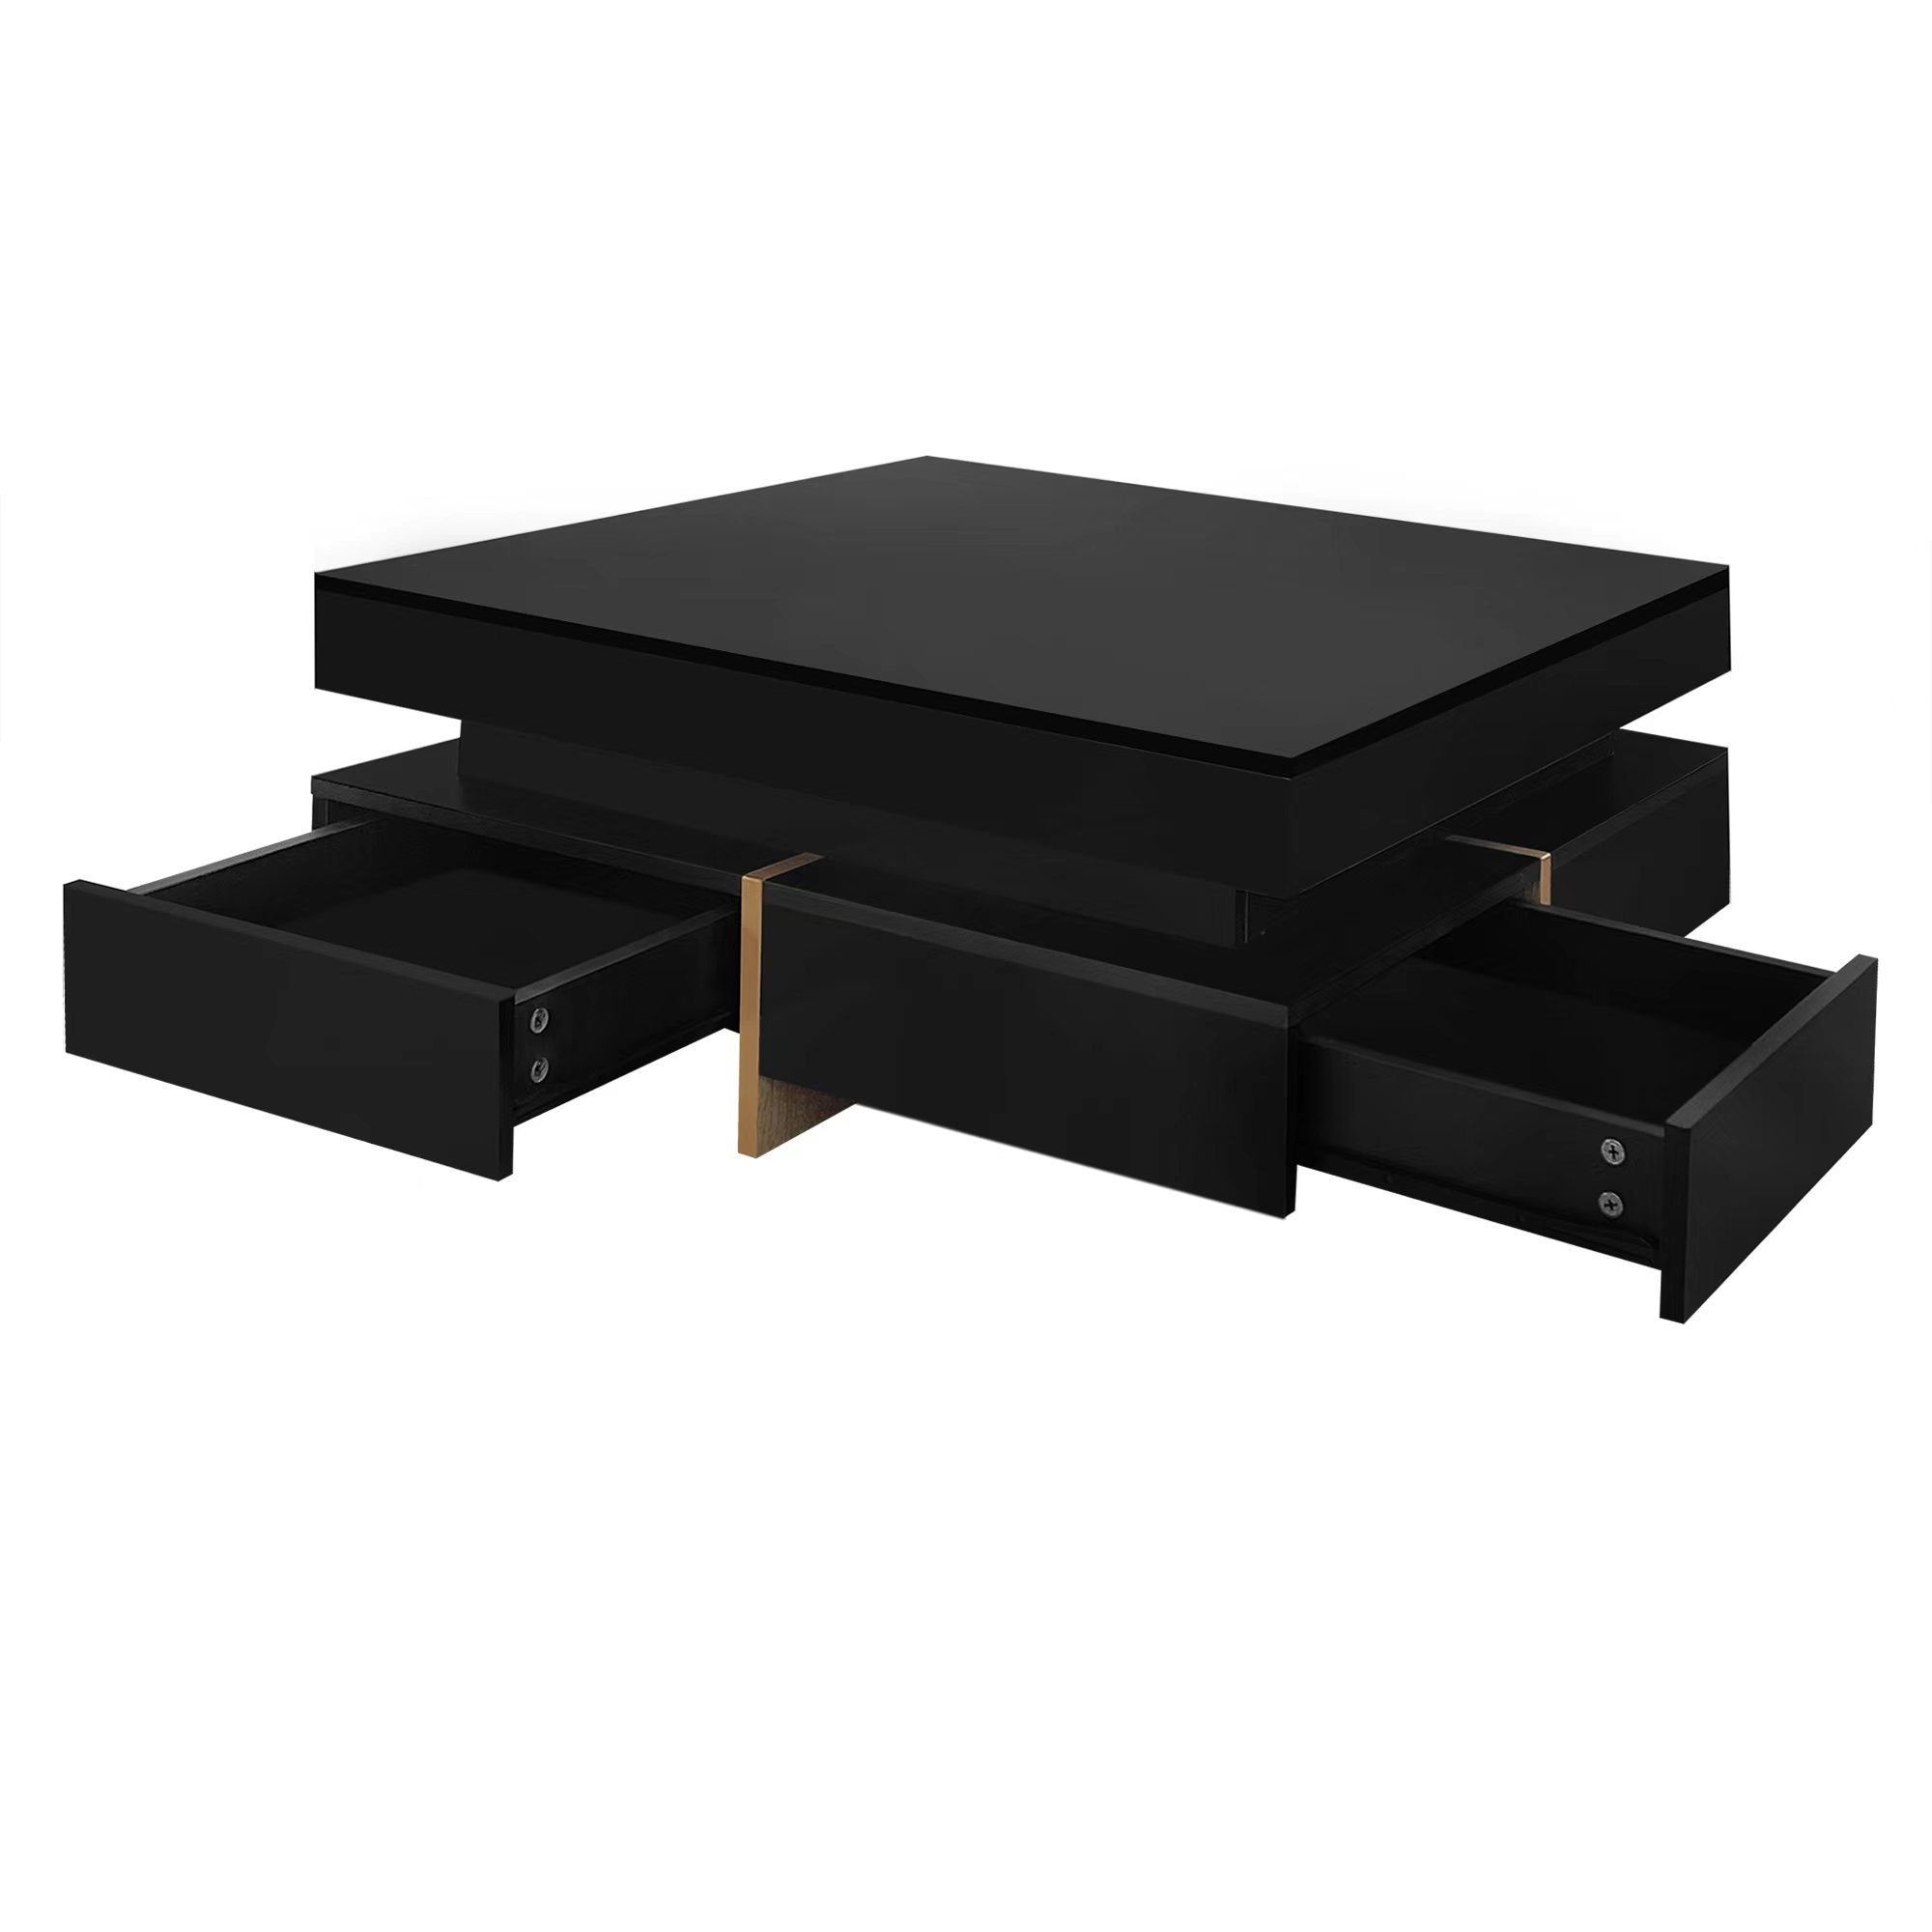 Arboga 31.5" x 31.5" Modern High Gloss Coffee Table with Storage Drawers